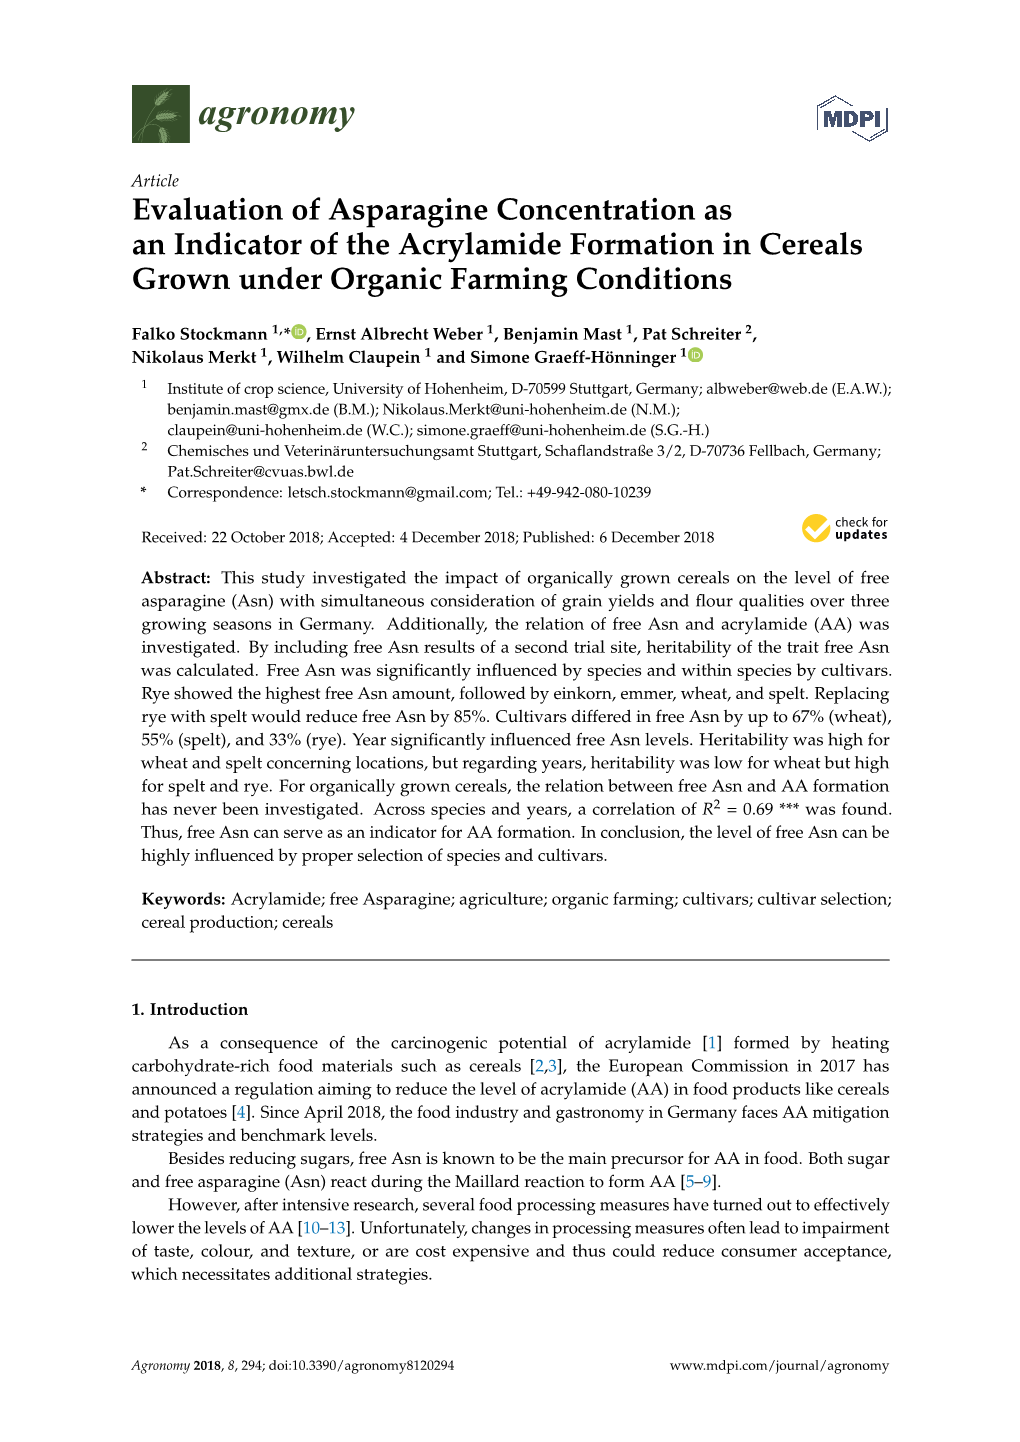 Evaluation of Asparagine Concentration As an Indicator of the Acrylamide Formation in Cereals Grown Under Organic Farming Conditions